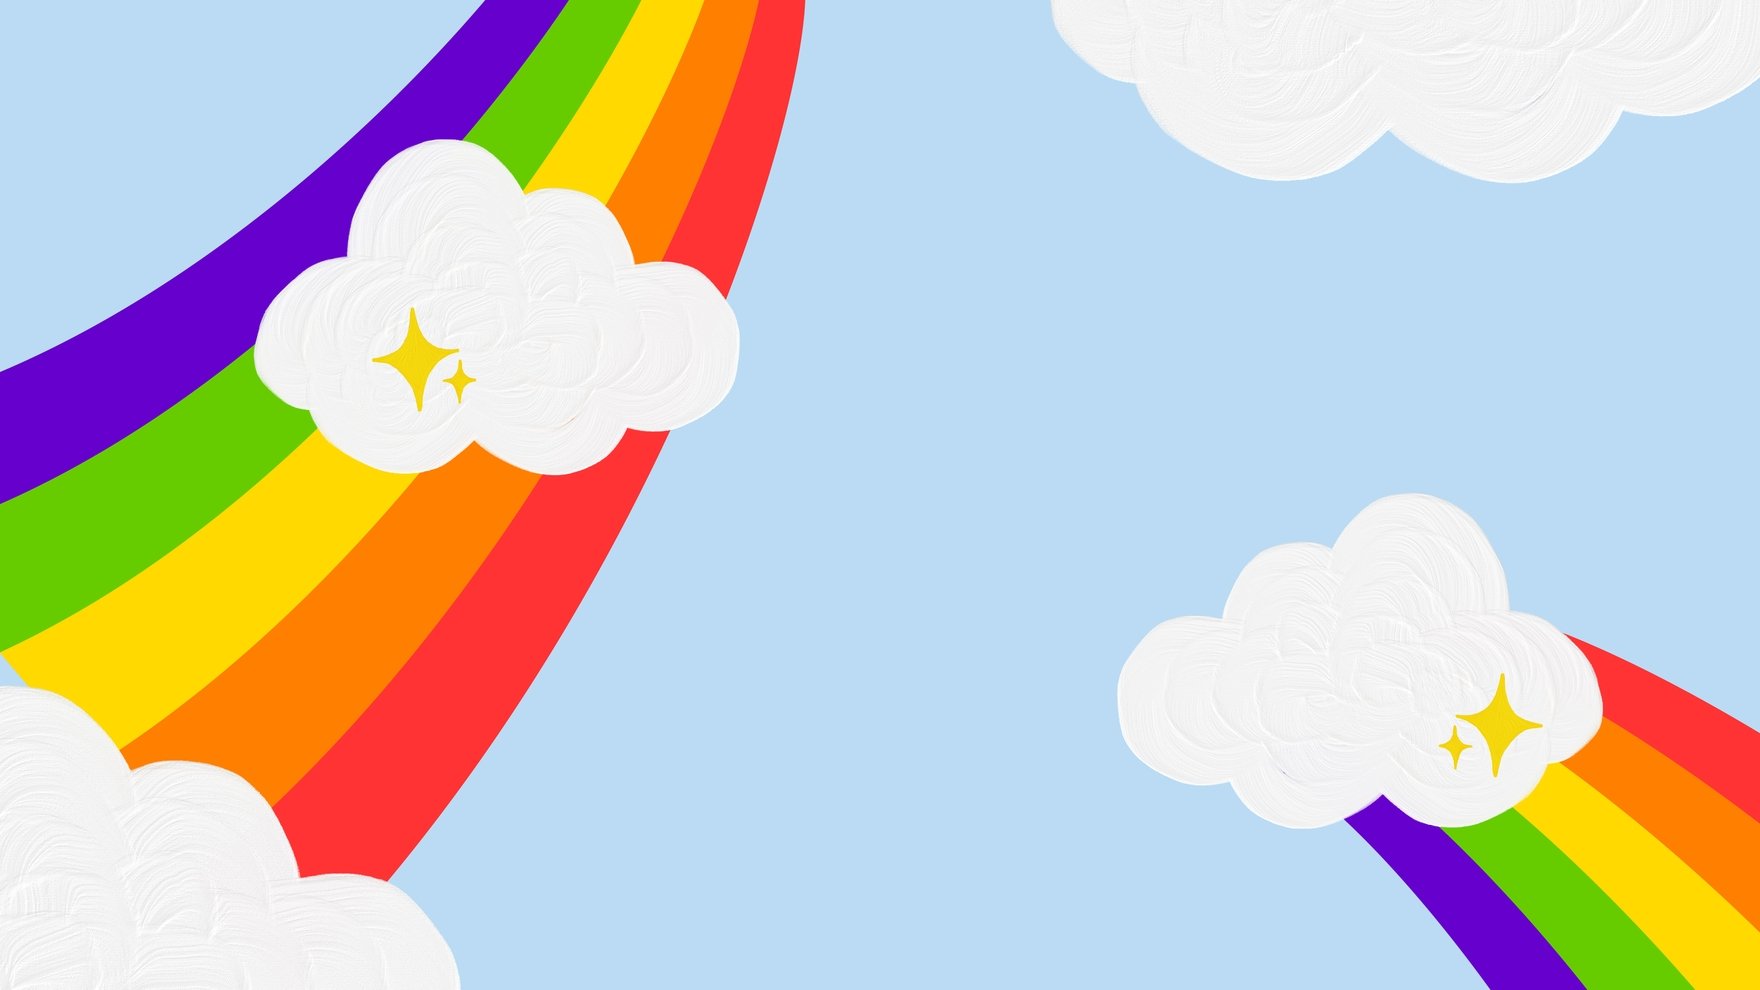 Free Cloud And Rainbow Background - EPS, Illustrator, JPG, PNG, SVG |  